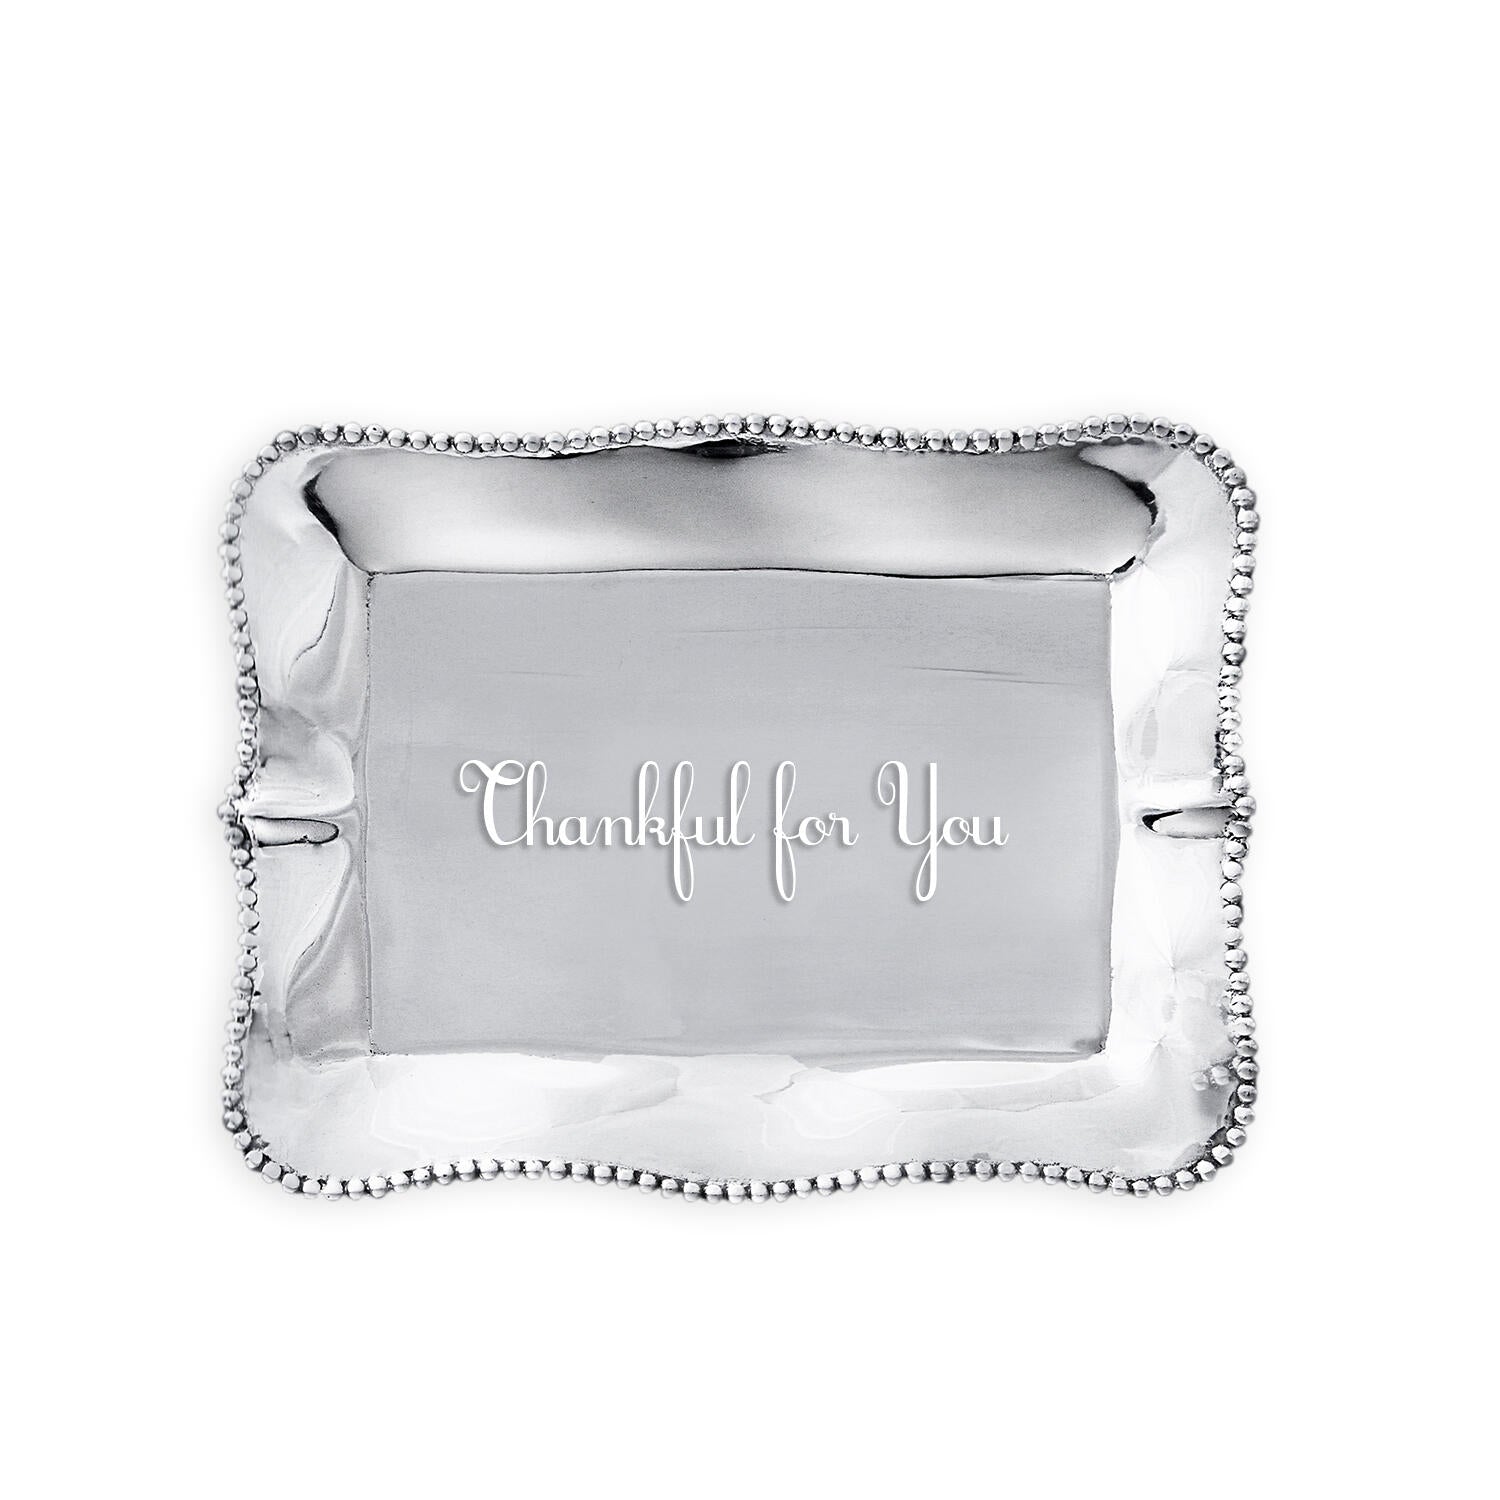 GIFTABLES Pearl Denisse Rectangular Engraved Tray - Thankful for You